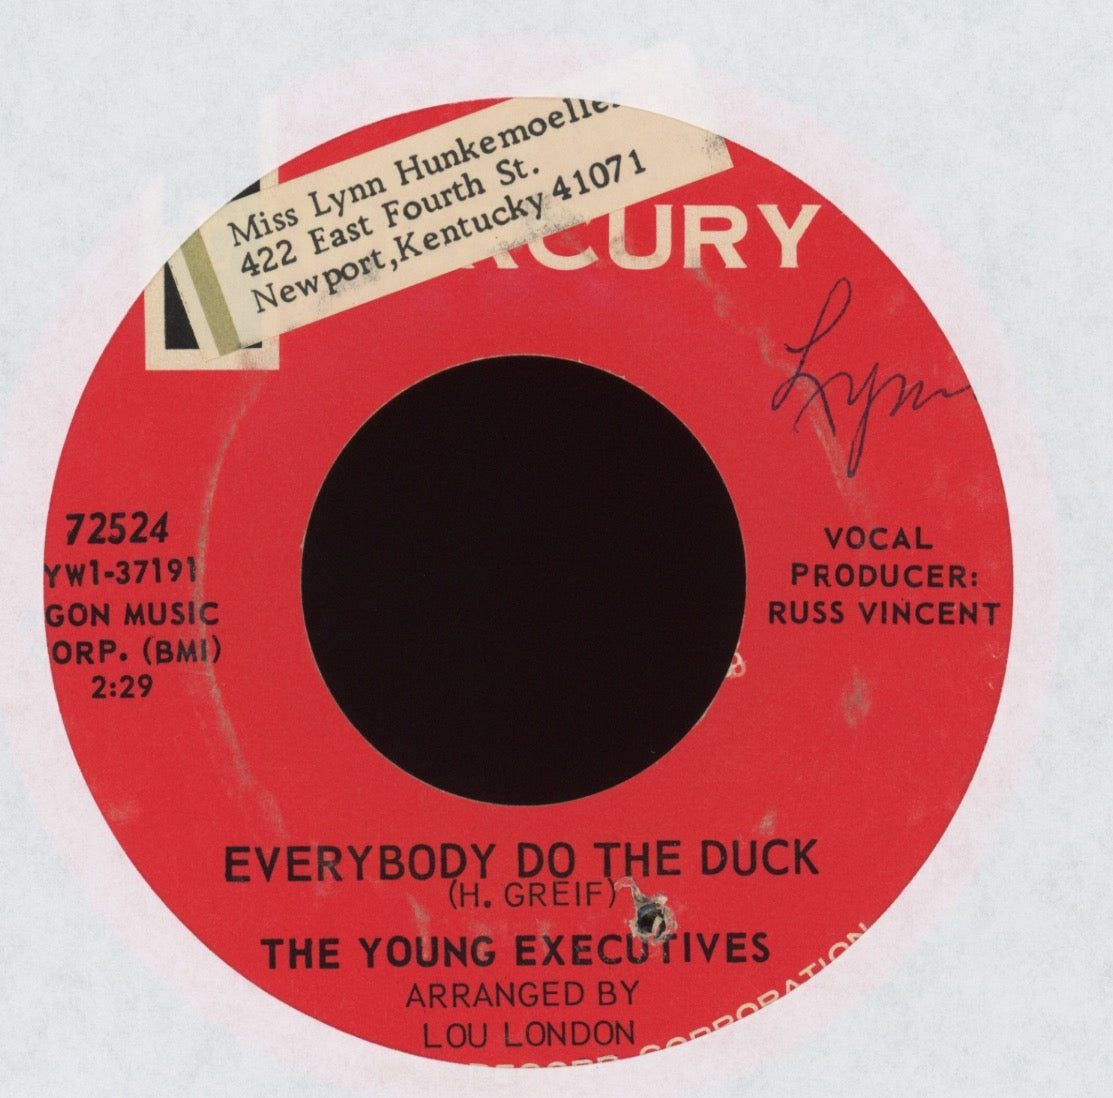 The Young Executives - Everybody Do The Duck on Mercury